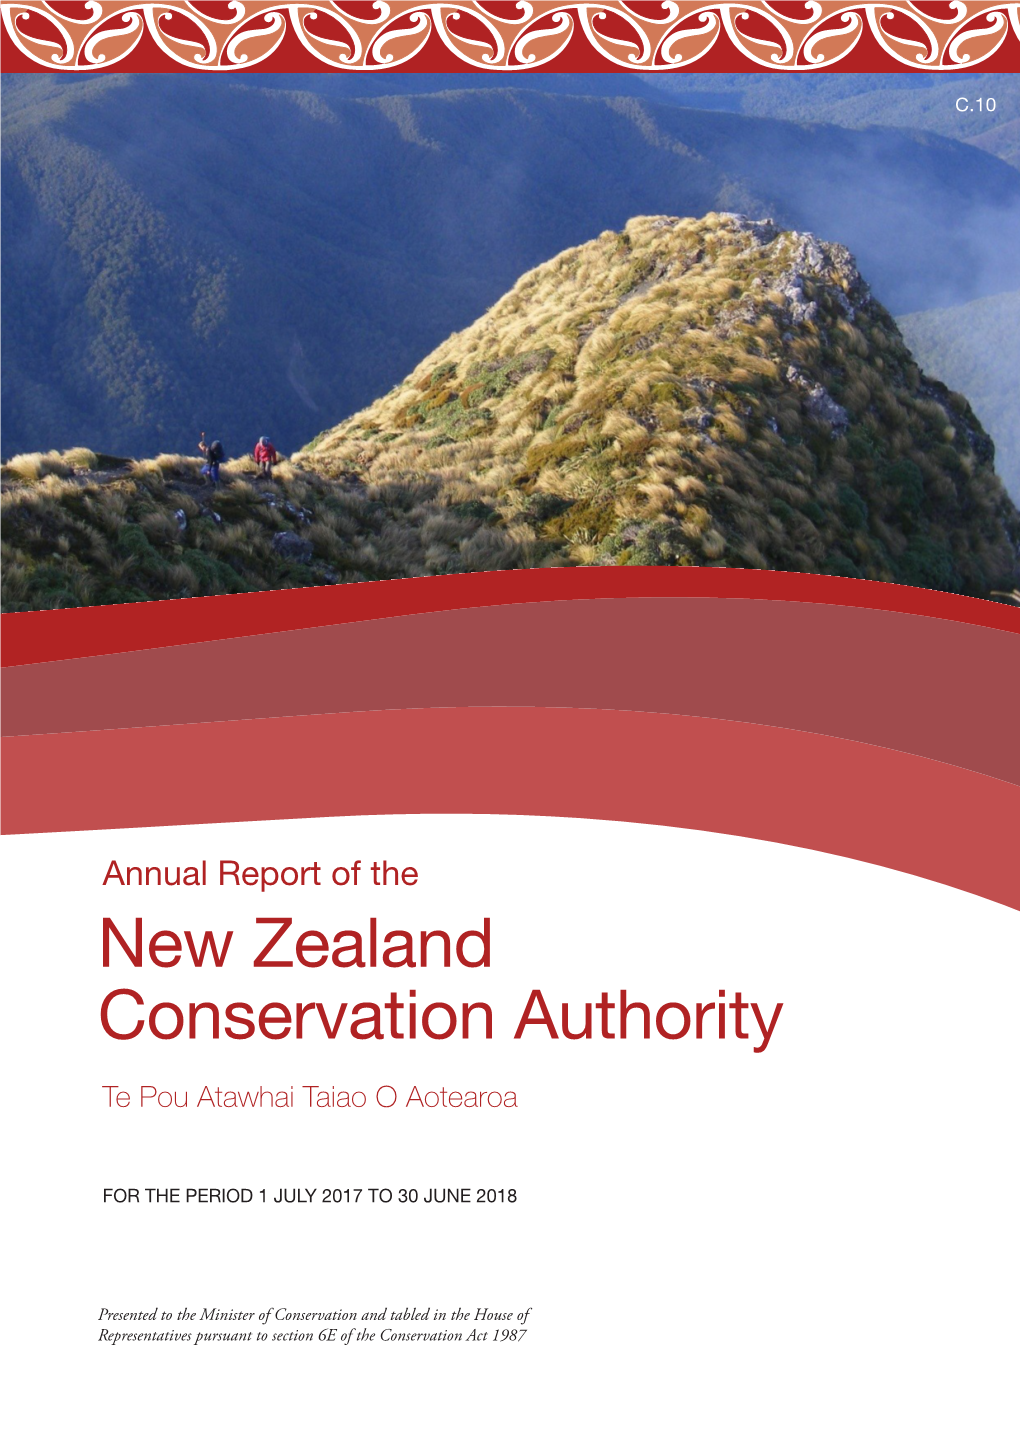 New Zealand Conservation Authority Annual Report 2017-2018